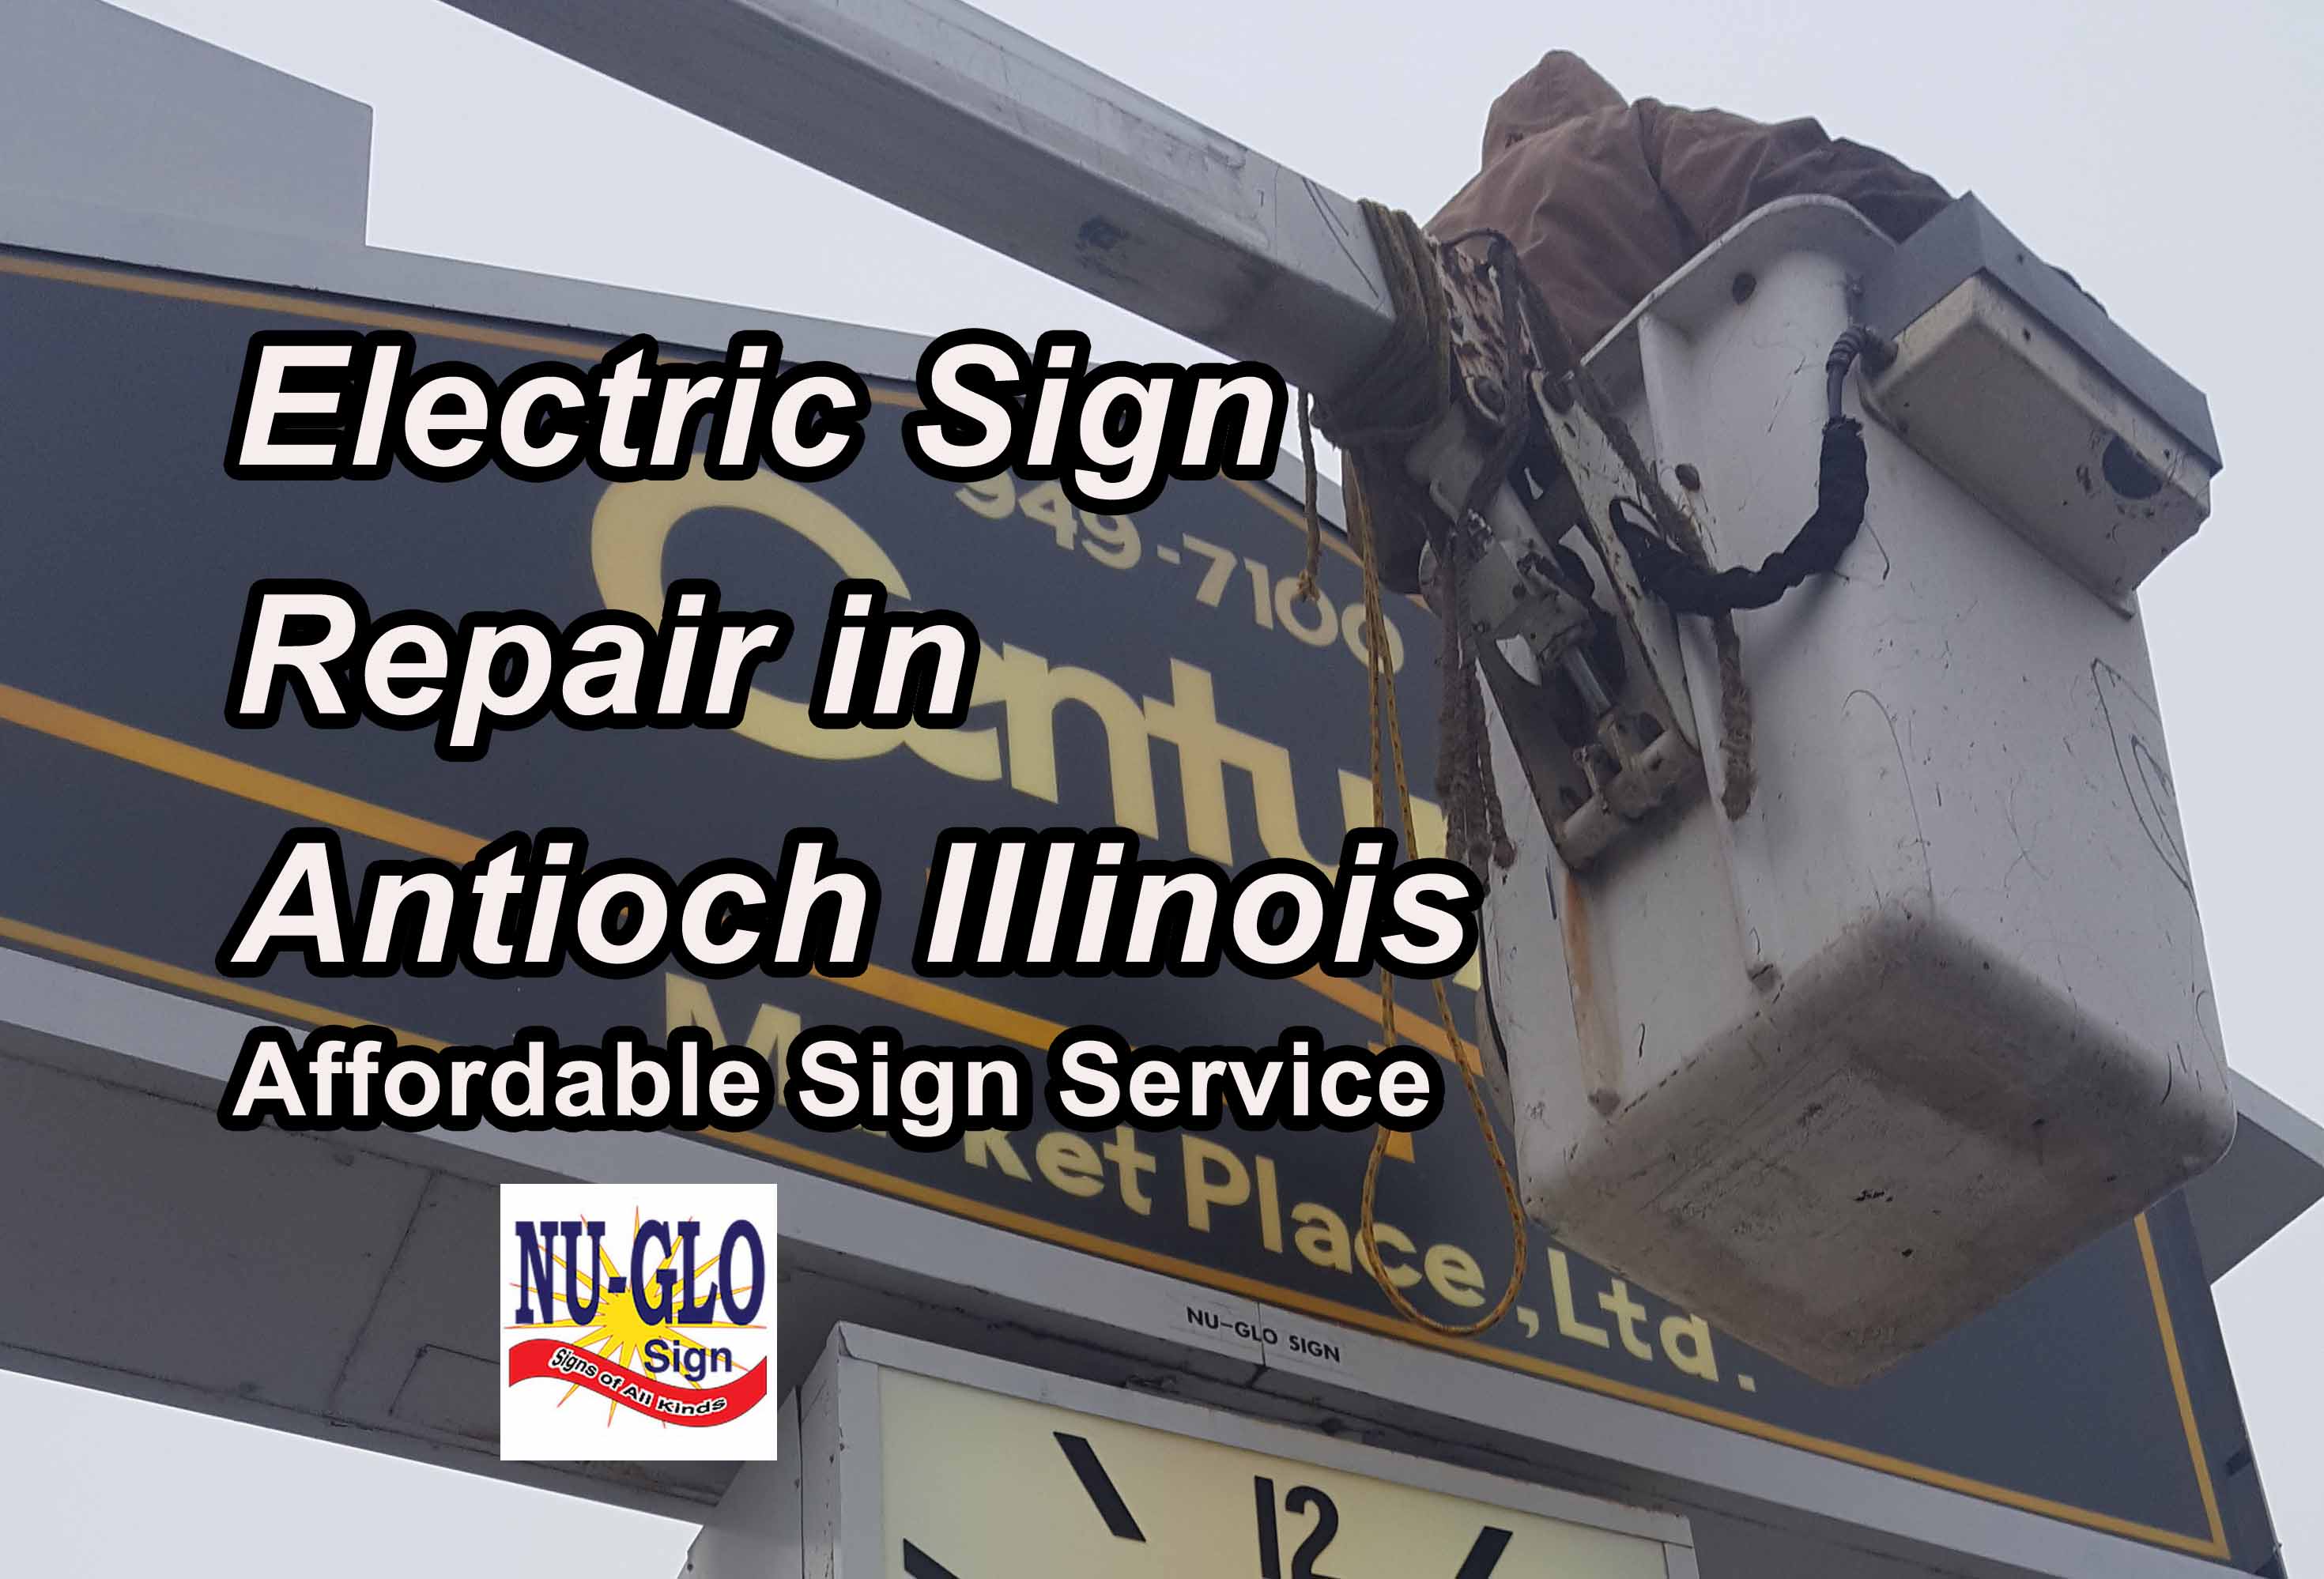 Electric Sign Repair in Antioch